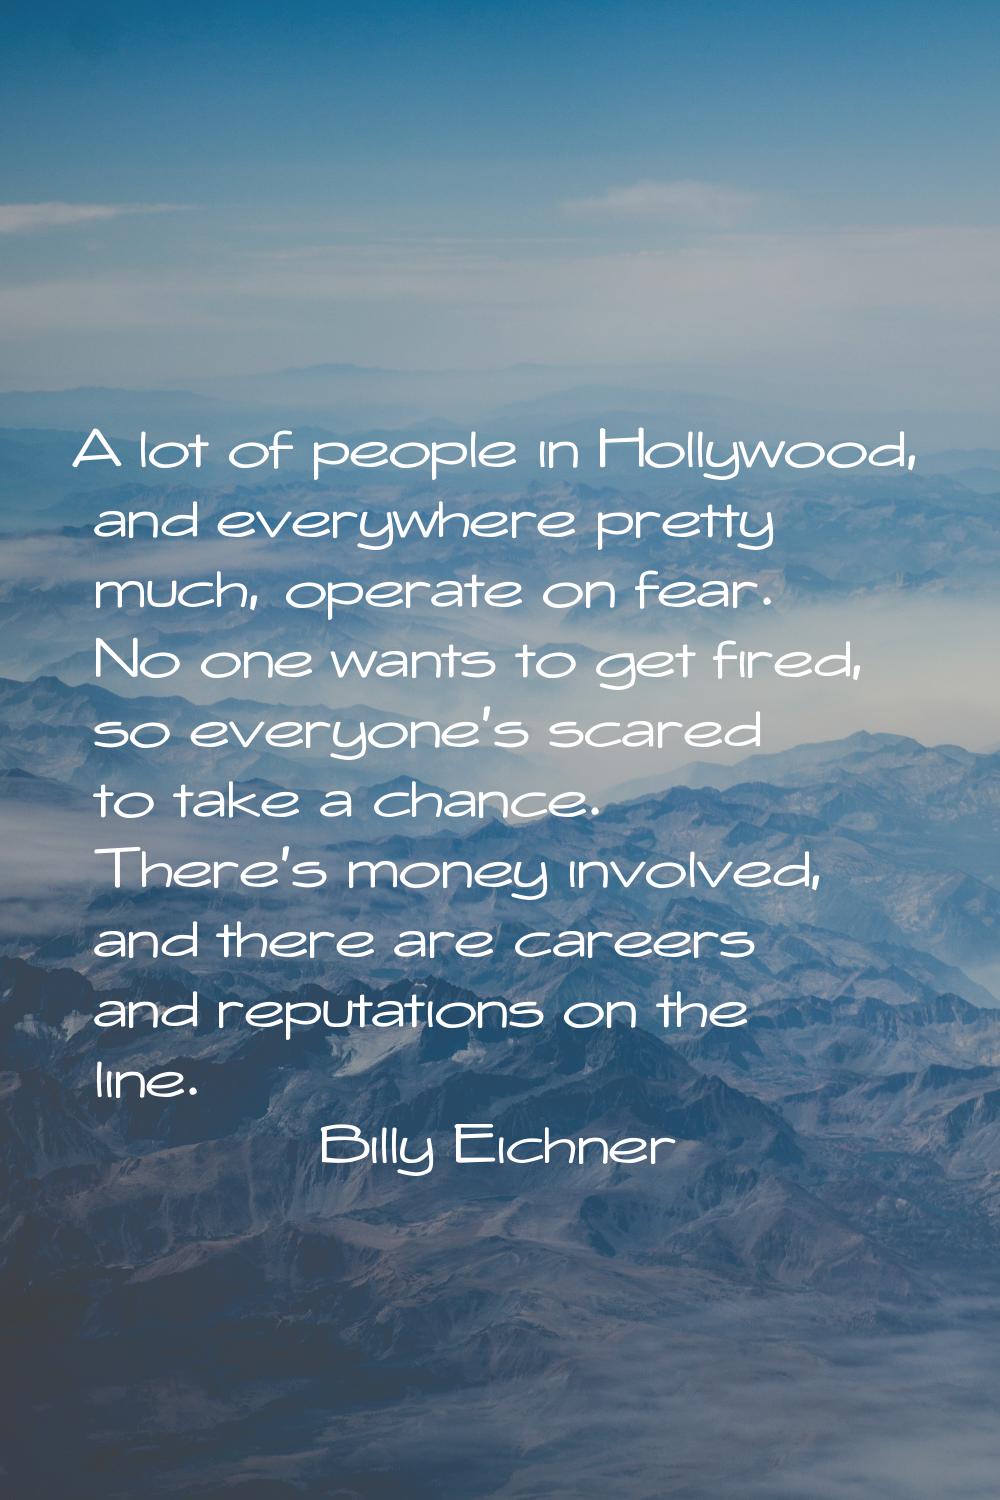 A lot of people in Hollywood, and everywhere pretty much, operate on fear. No one wants to get fire